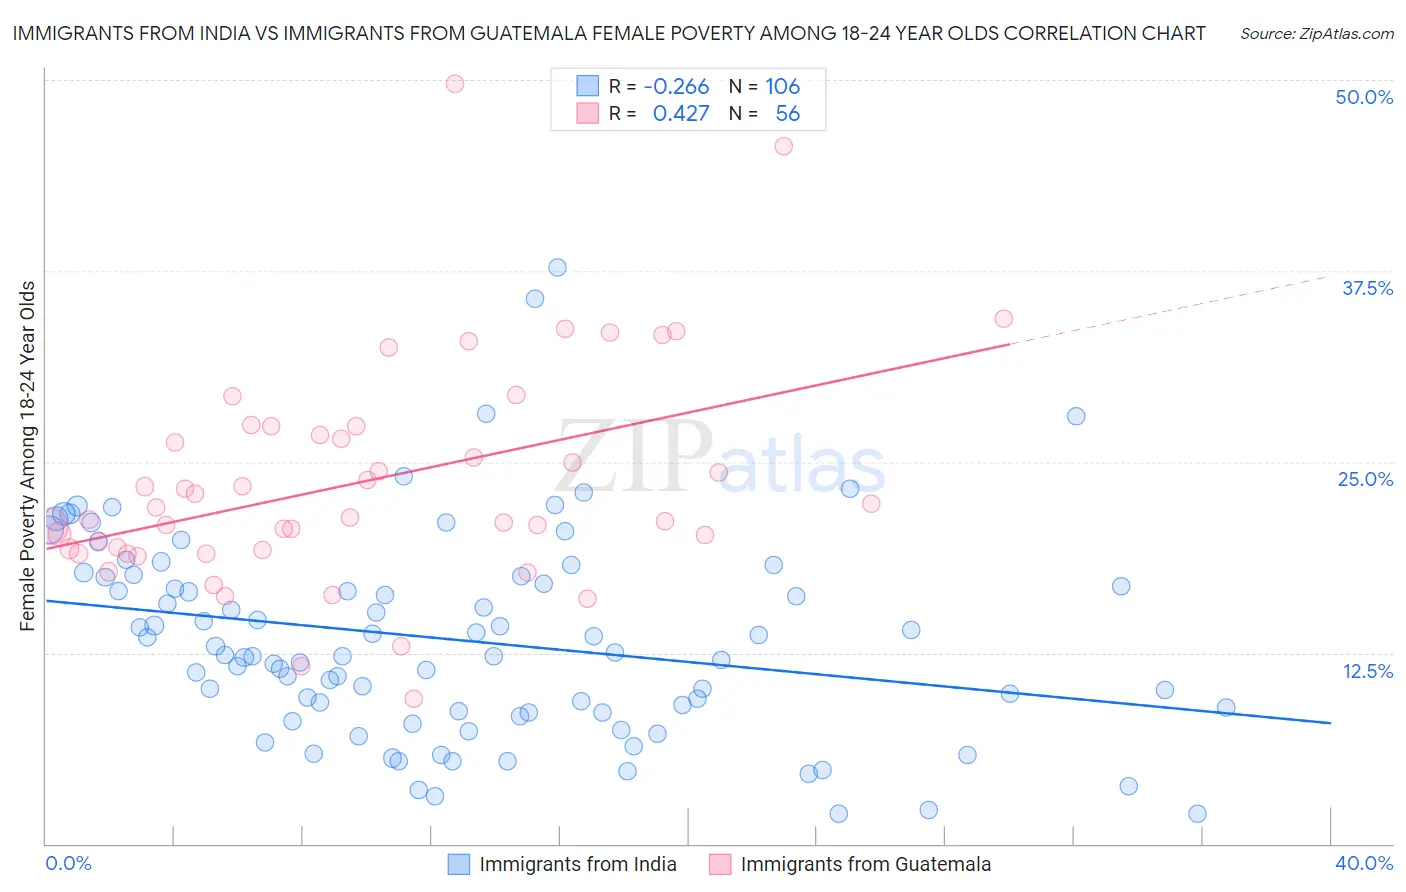 Immigrants from India vs Immigrants from Guatemala Female Poverty Among 18-24 Year Olds